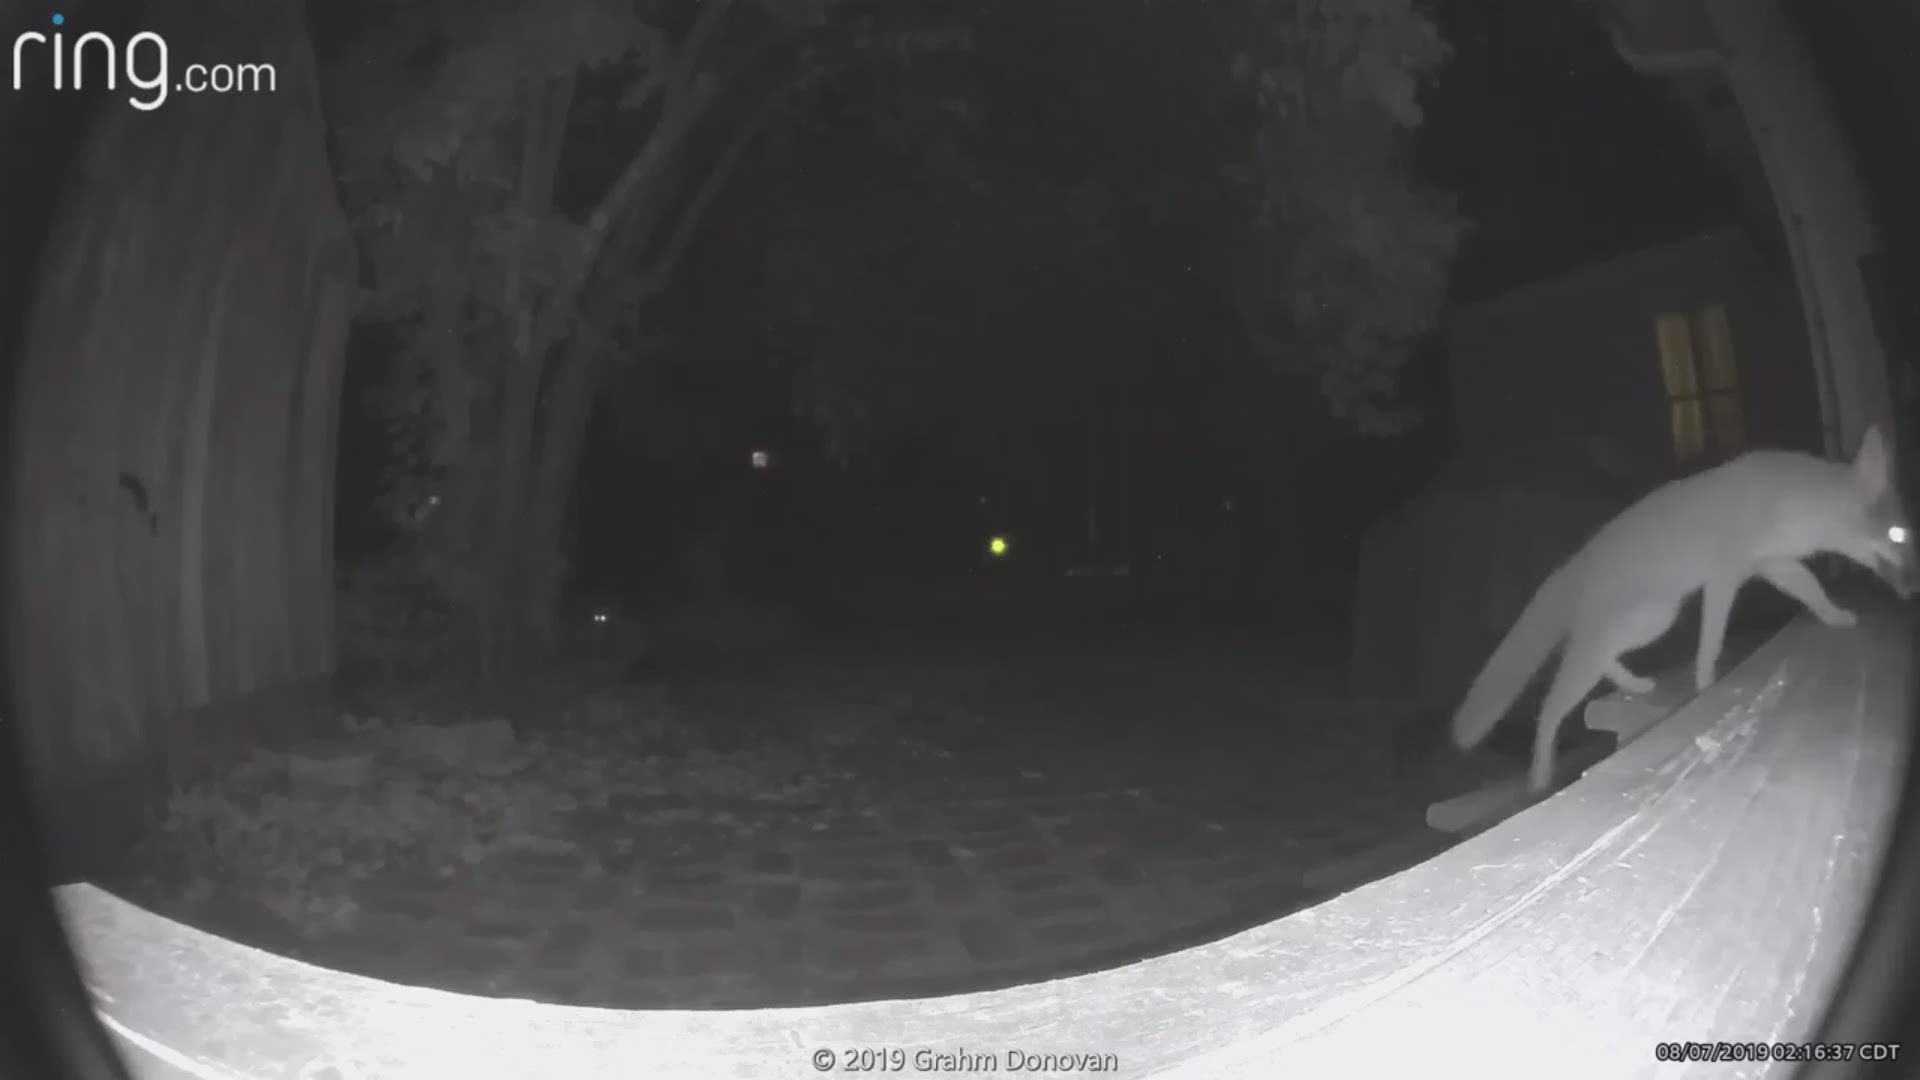 Two foxes got caught stealing a dog's favorite squeaky toys. Video courtesy of Grahm Donovan.